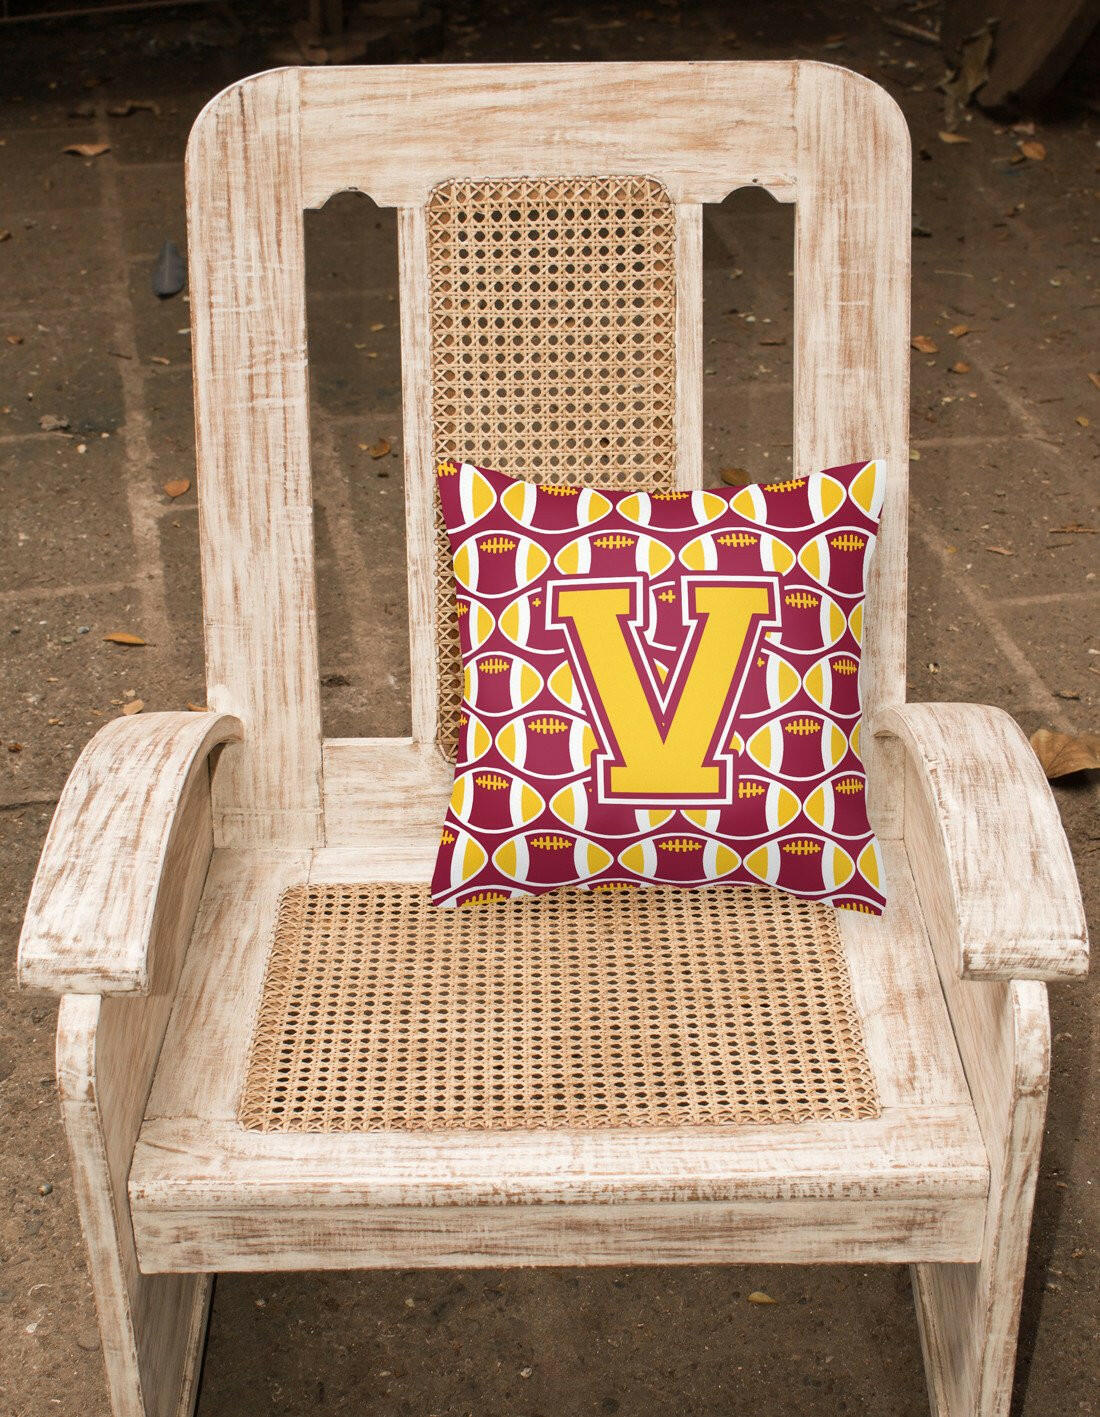 Letter V Football Maroon and Gold Fabric Decorative Pillow CJ1081-VPW1414 by Caroline's Treasures